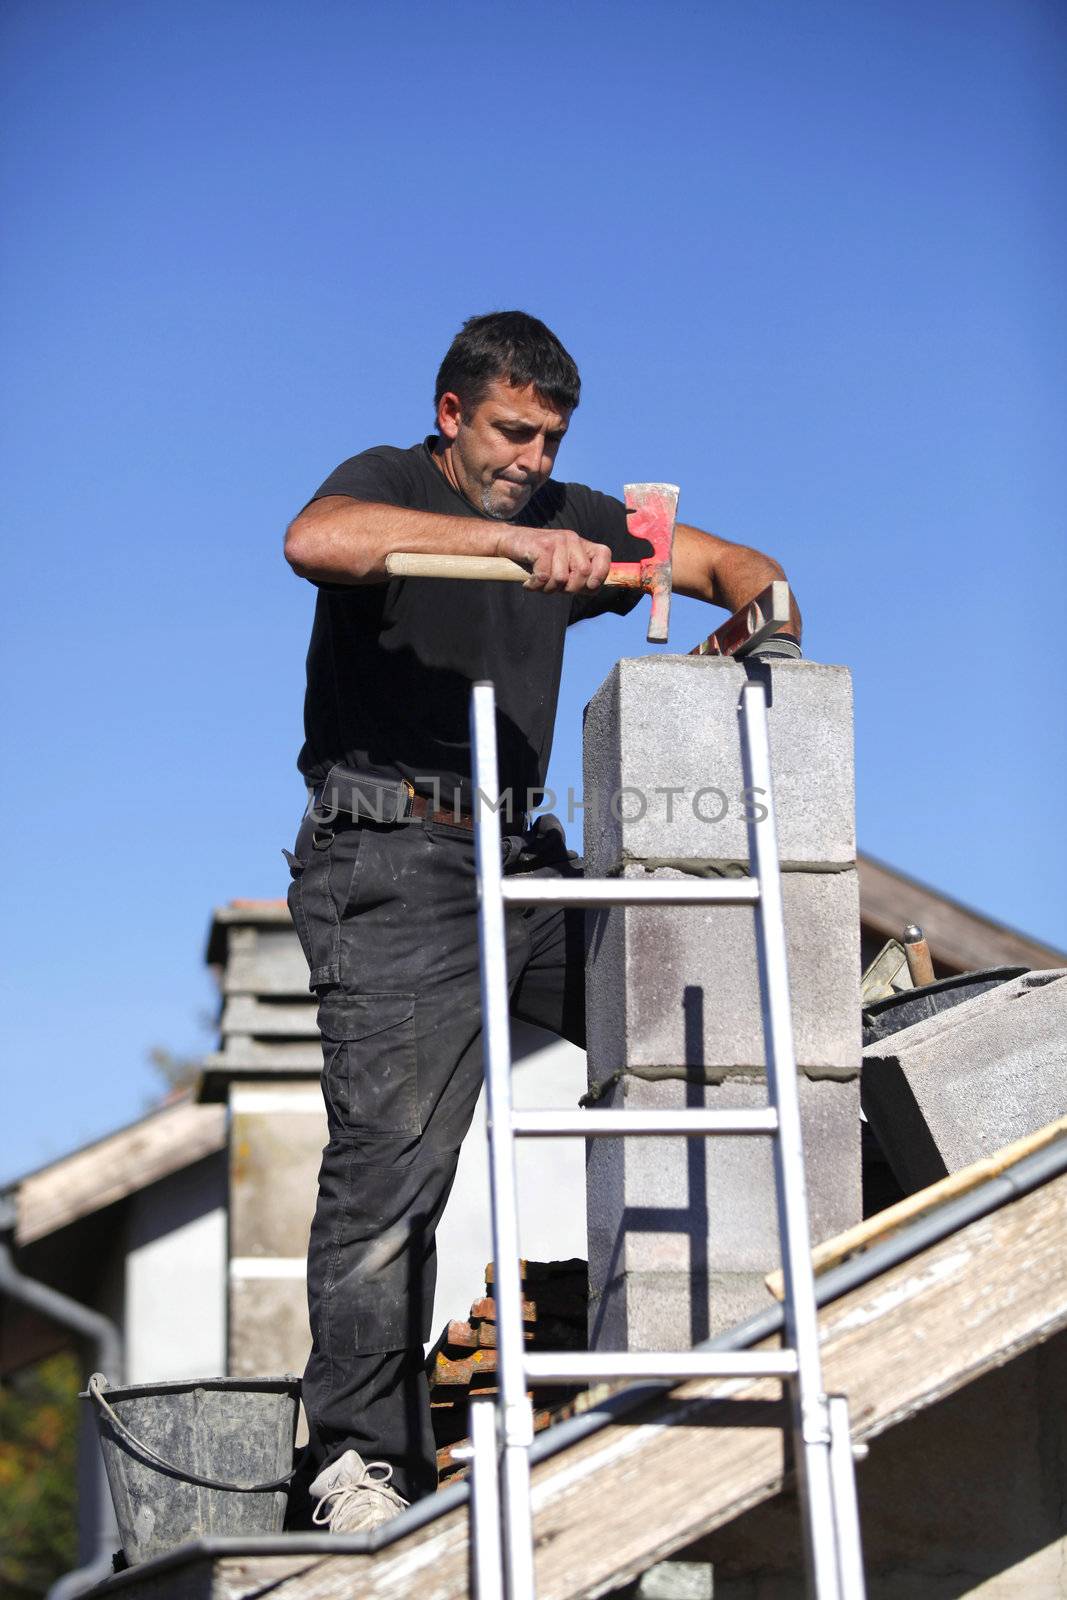 Builder constructing a chimney by phovoir